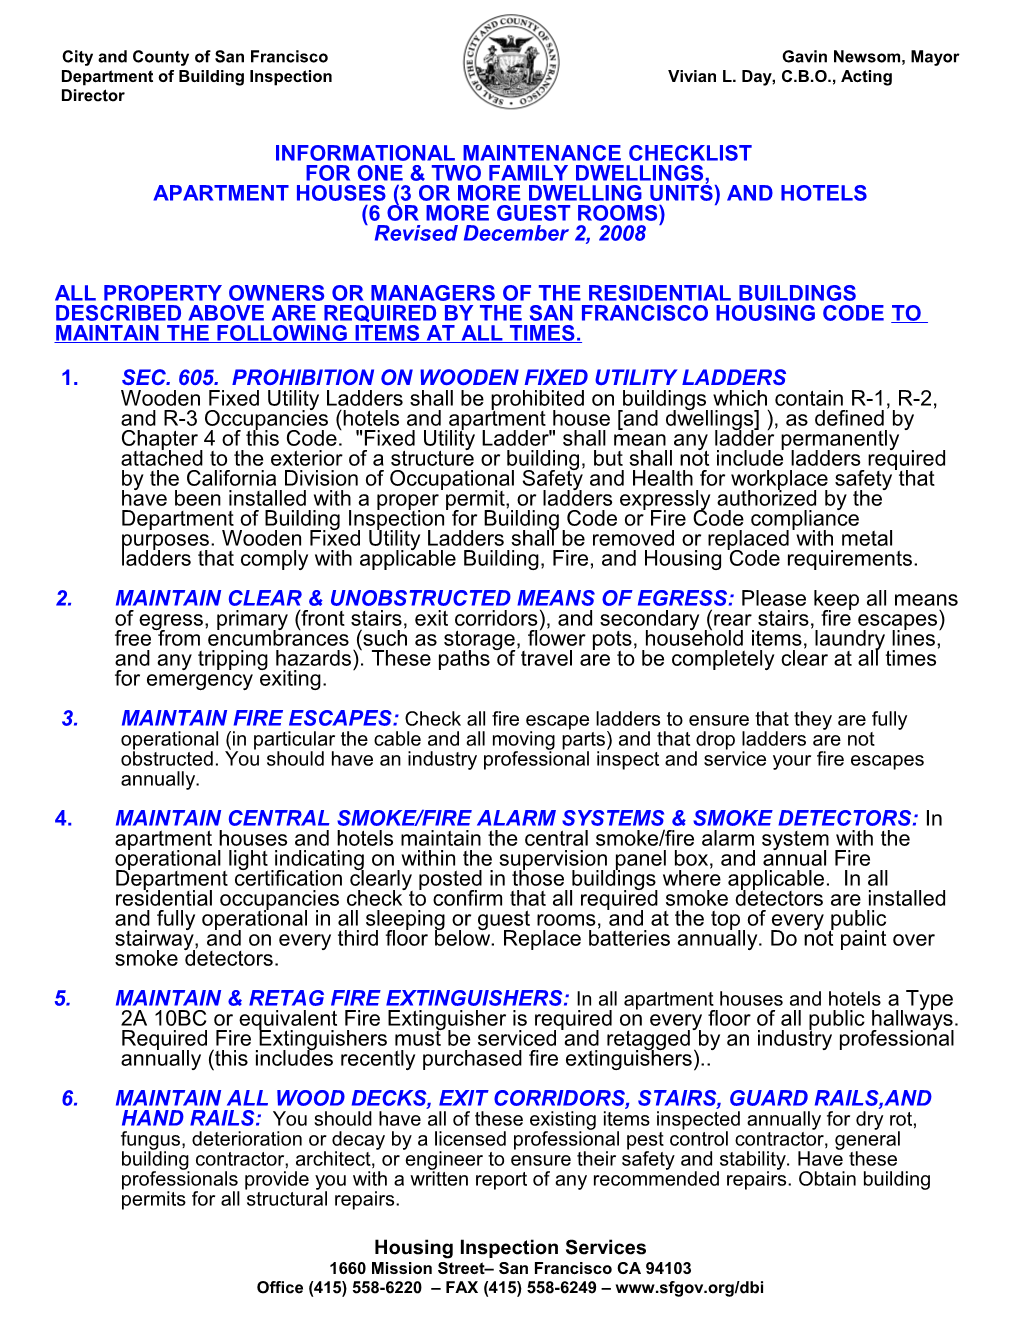 Residential Building Owner/Operator Page 4 of 4